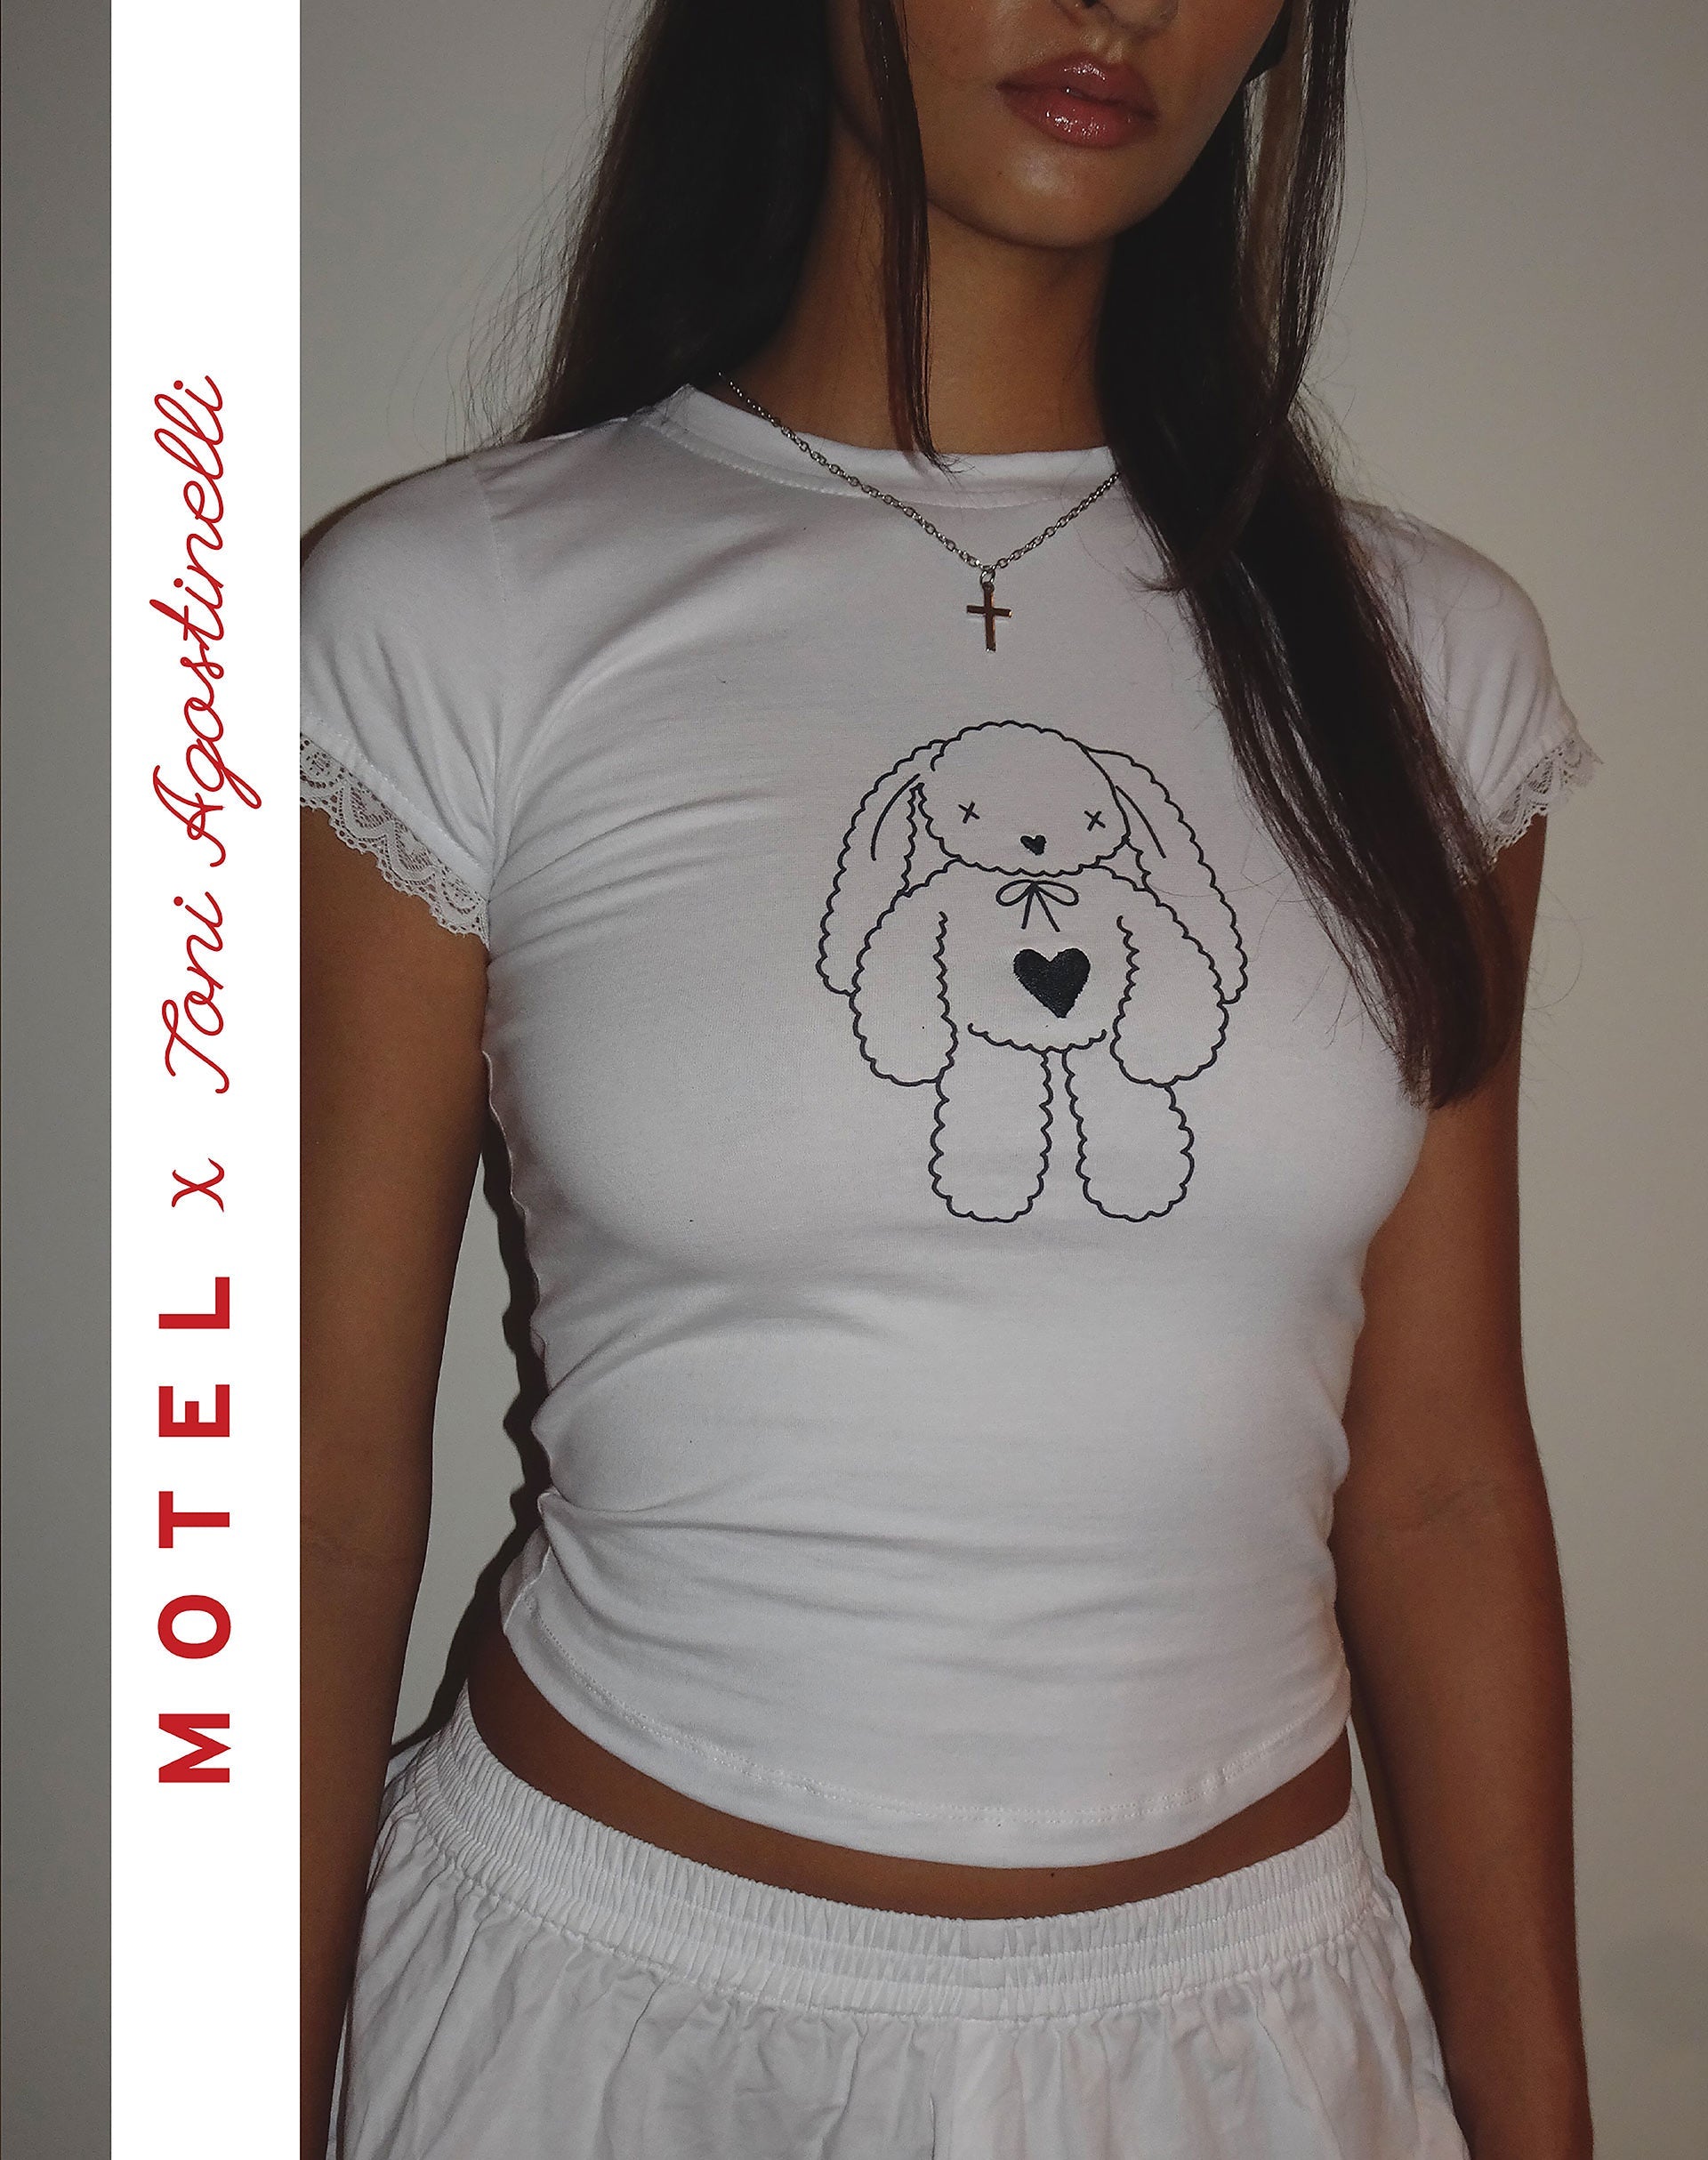 Image of MOTEL X Toni Agost Tattoo Izzy Tee in White with Heart Bunny Motif